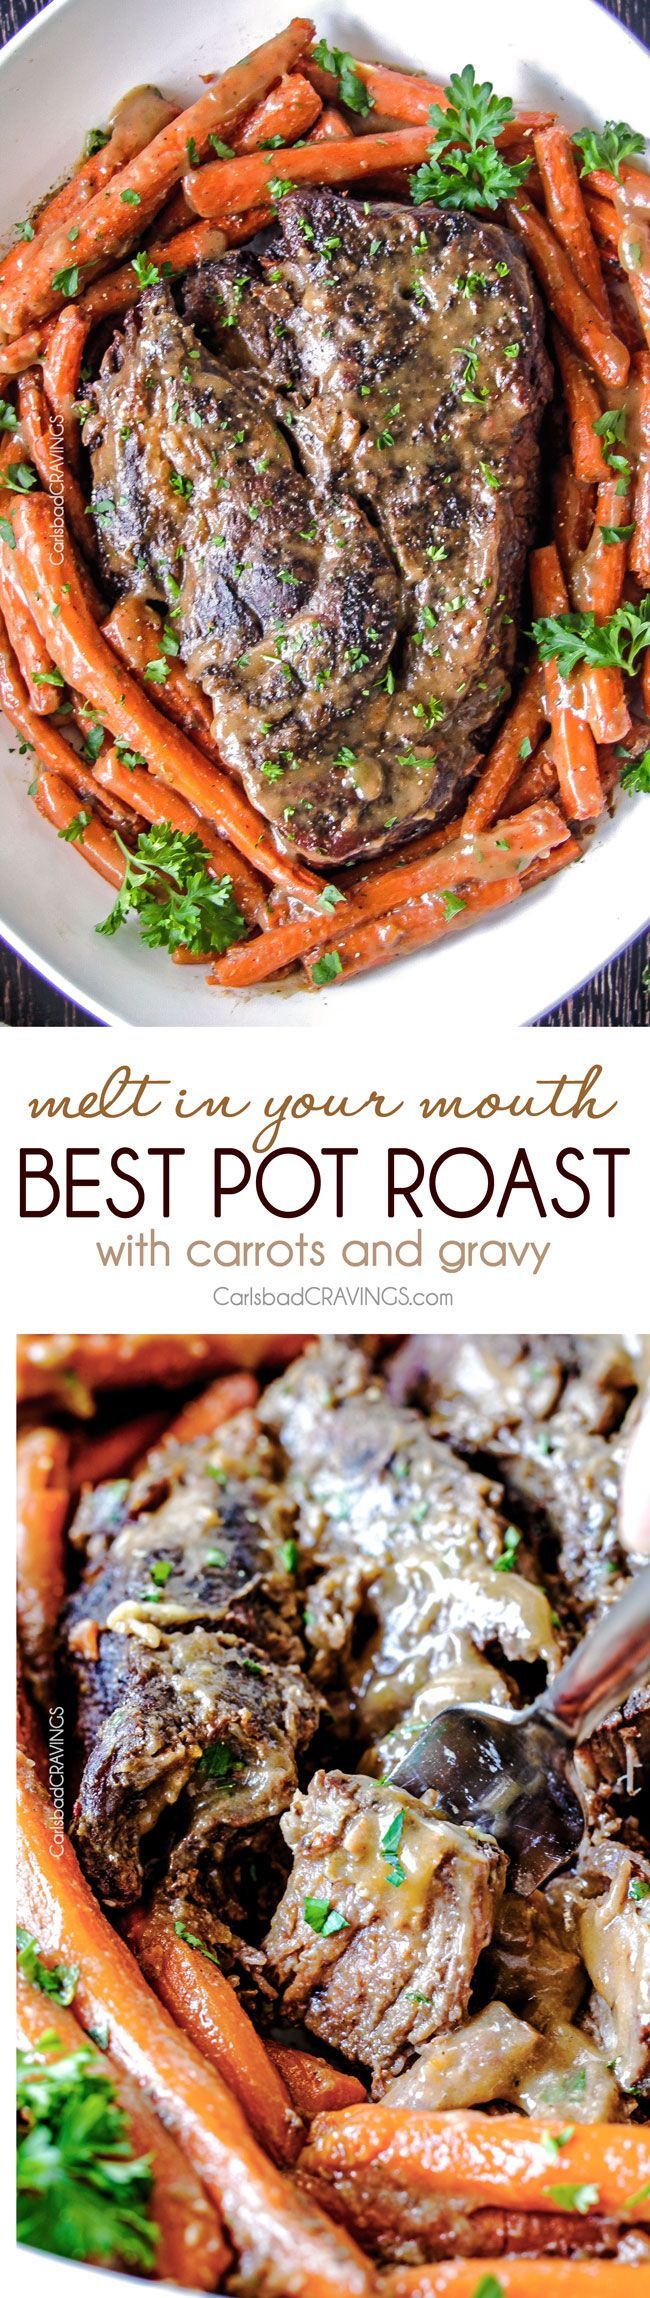 the BEST Melt in Your Mouth Pot Roast and carrots with mouthwatering gravy is the best pot roast I have ever had! Juicy, fall